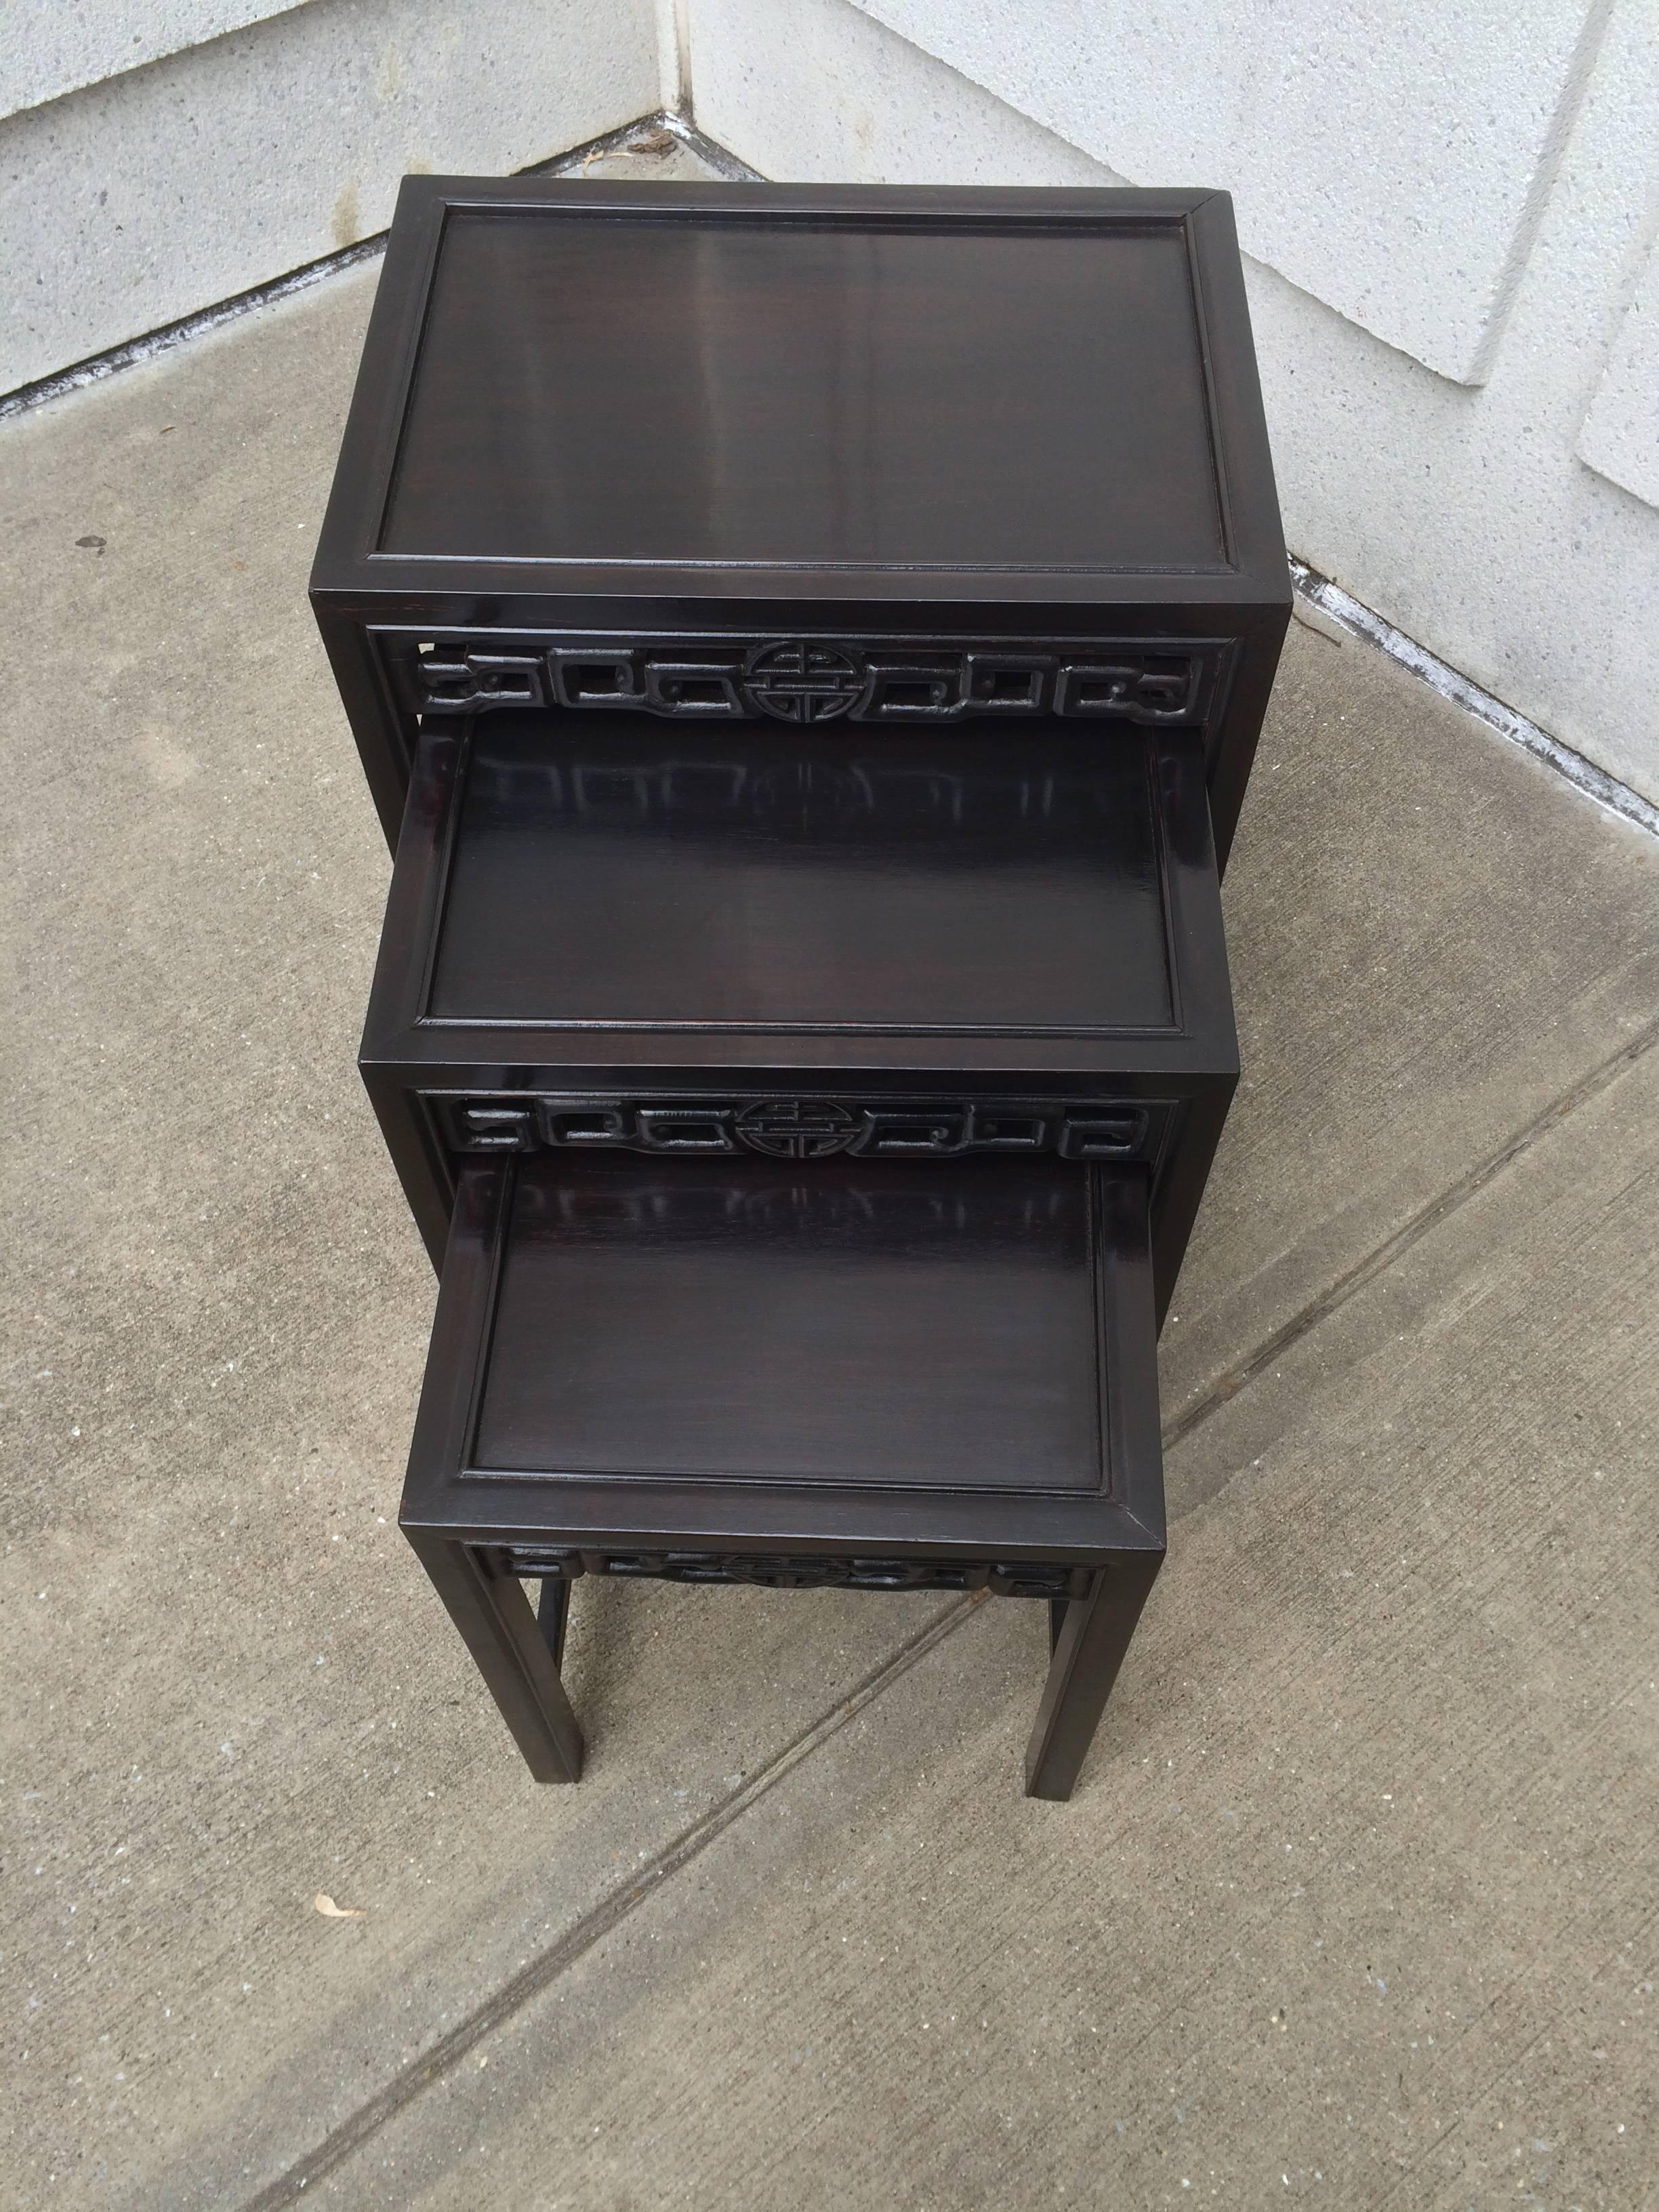 Set of three Chinese nesting tables, carved of hard wood with a rich ebonized finish with reddish undertones. Each with a carved openwork apron. The tables fit together as one or come apart as three separate tables. Great for entertaining.